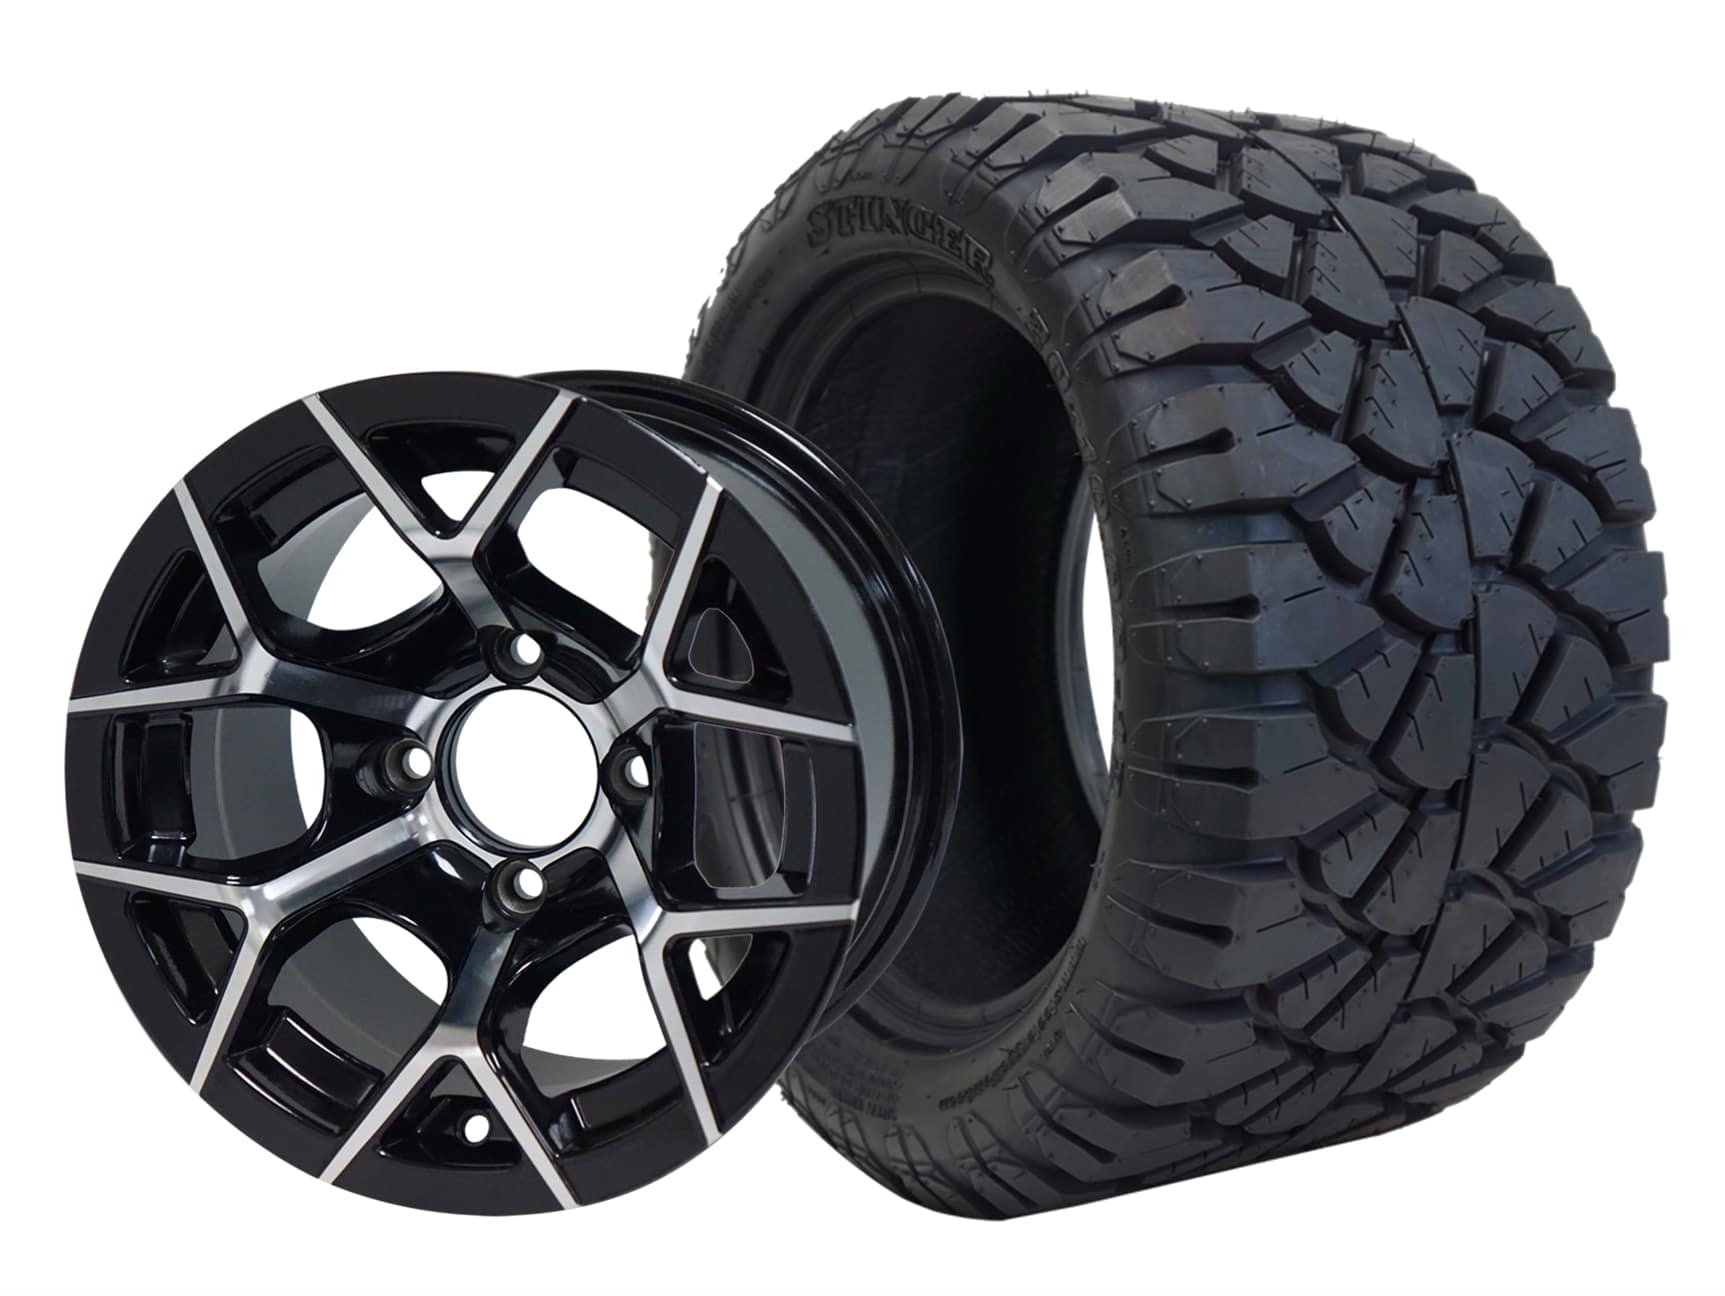 BNDL-TR1203-WH1226-CC0001-LN0001 12″ RALLY MACHINED/BLACK WHEEL – ALUMINUM ALLOY / STEELENG 22″X10.5″-12″ STINGER ALL TERRAIN TIRE DOT APPROVED